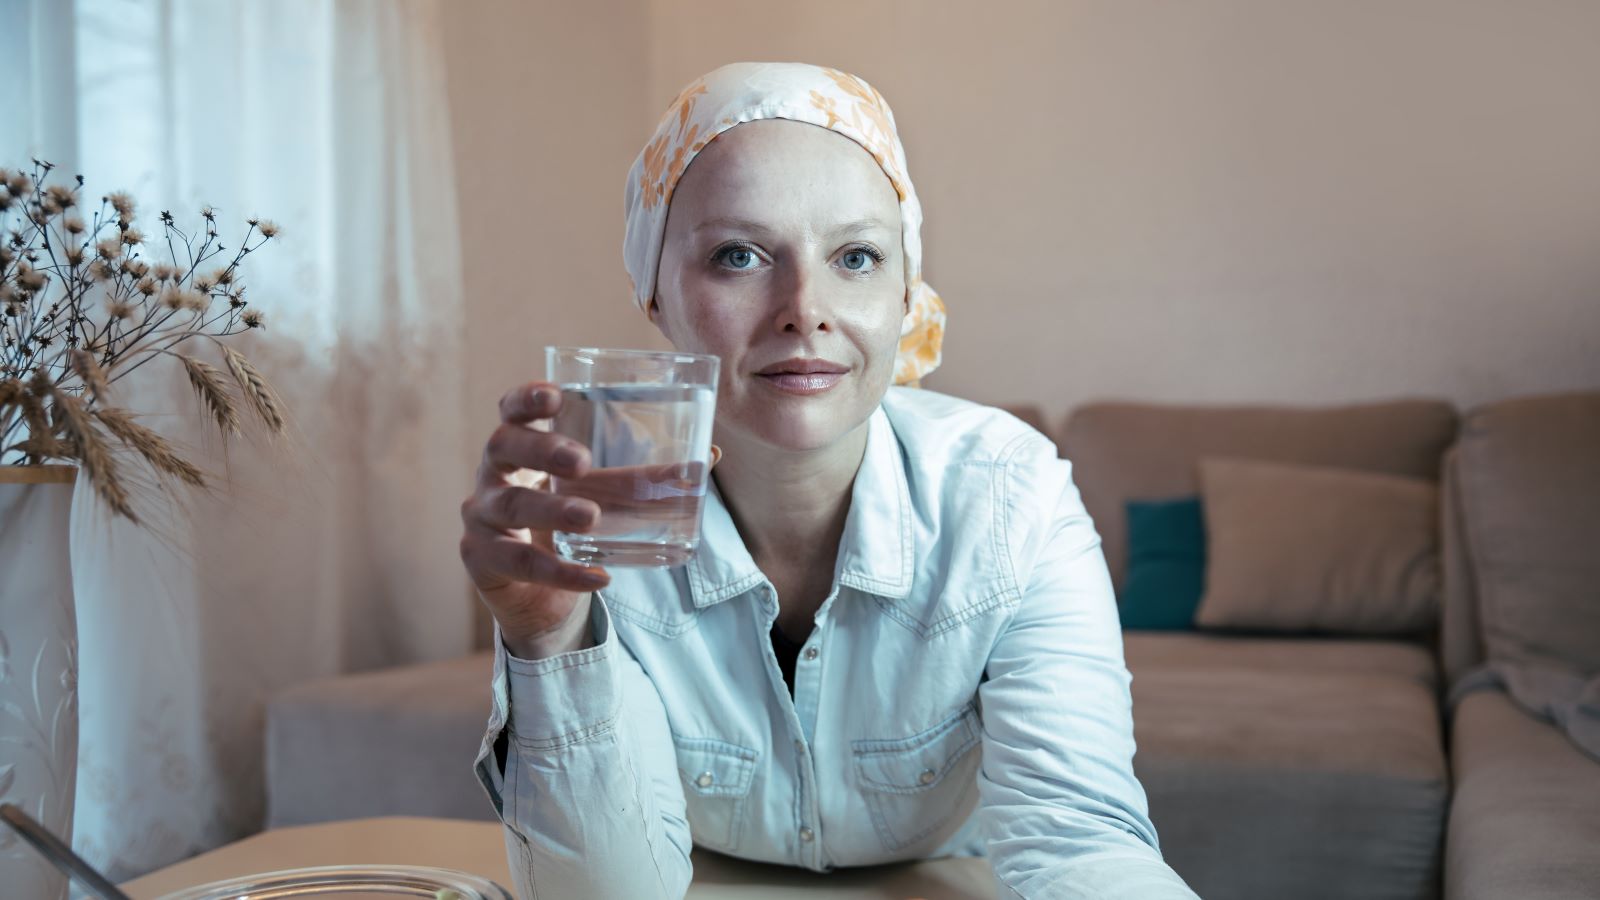 5 Natural Ways to Help With Nausea During Chemo